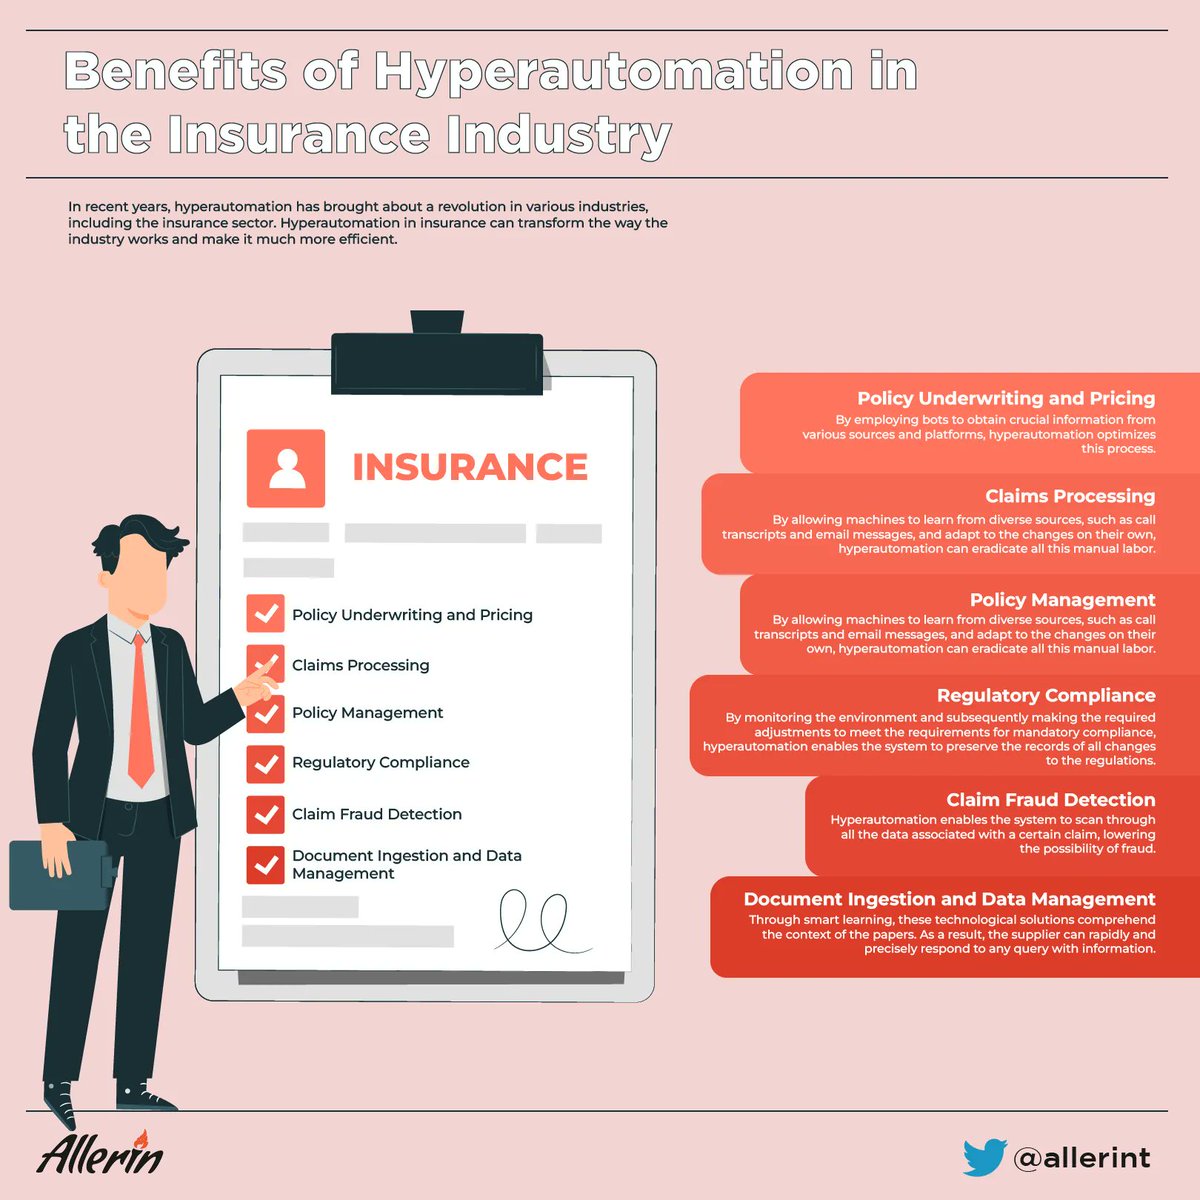 6 Ways #Hyperautomation Can Improve the Insurance Industry buff.ly/3k0eDG6